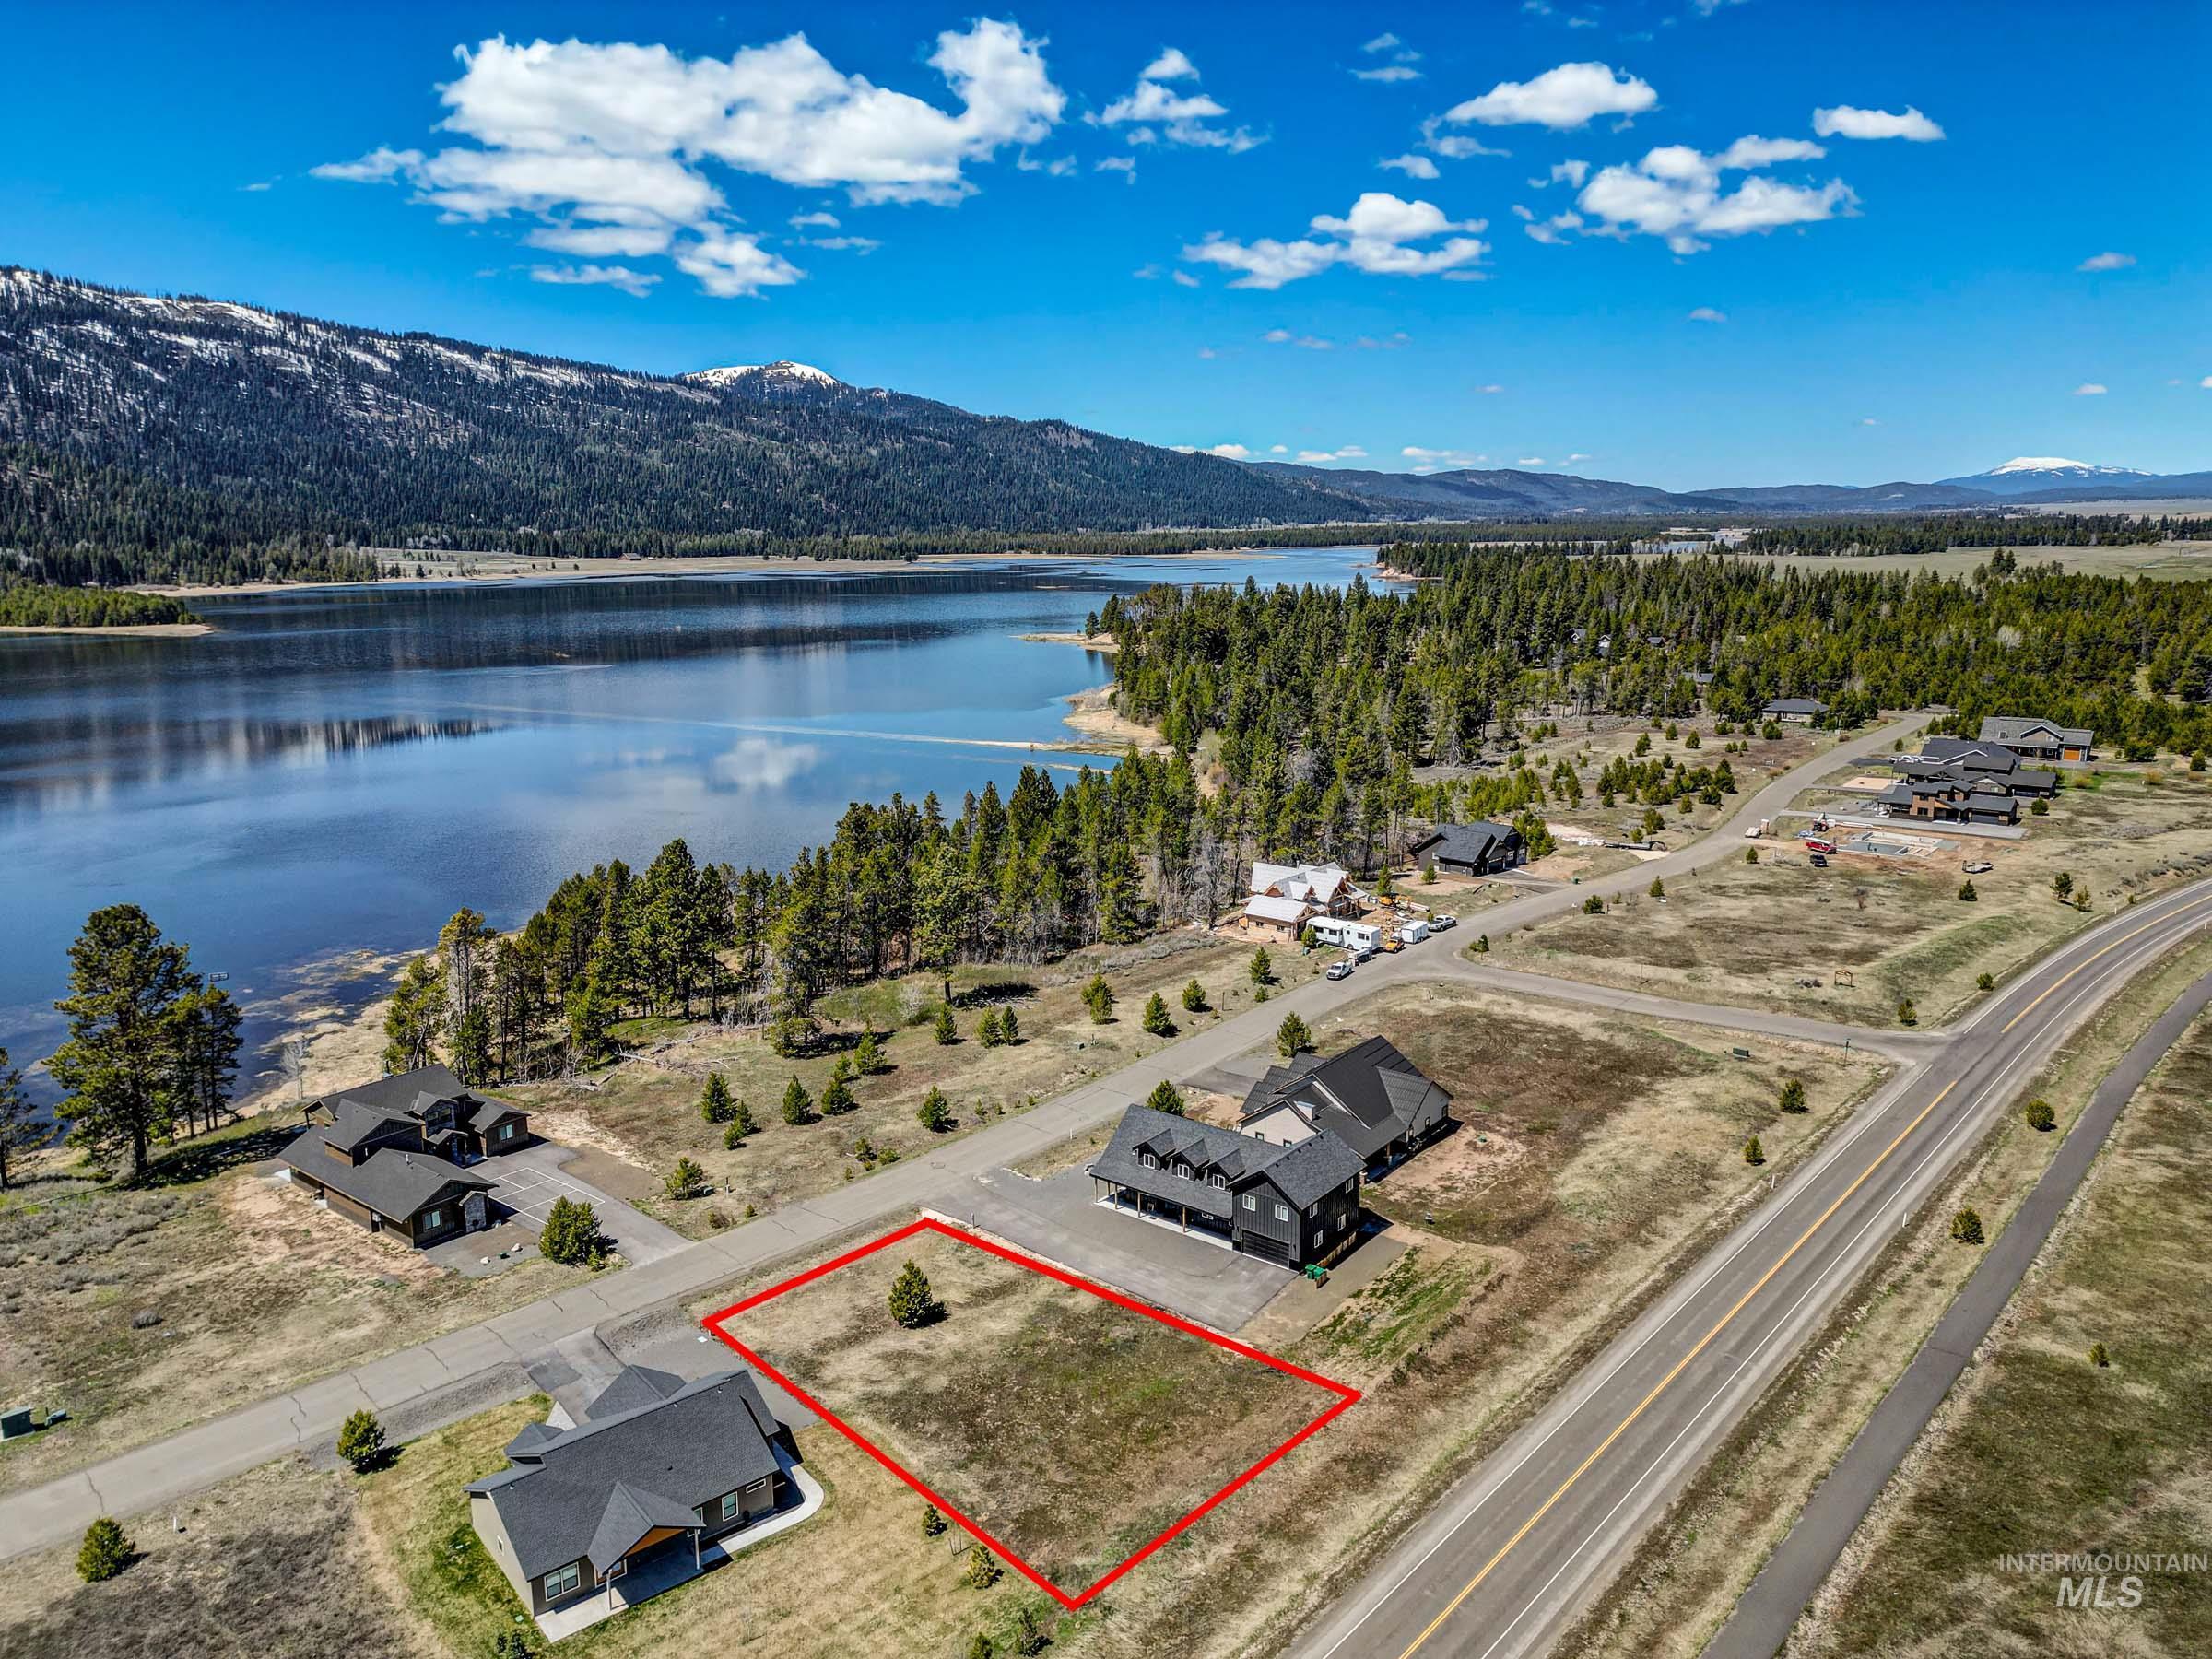 13140 Hawks Bay Road, Donnelly, Idaho 83638, Land For Sale, Price $199,900,MLS 98910806